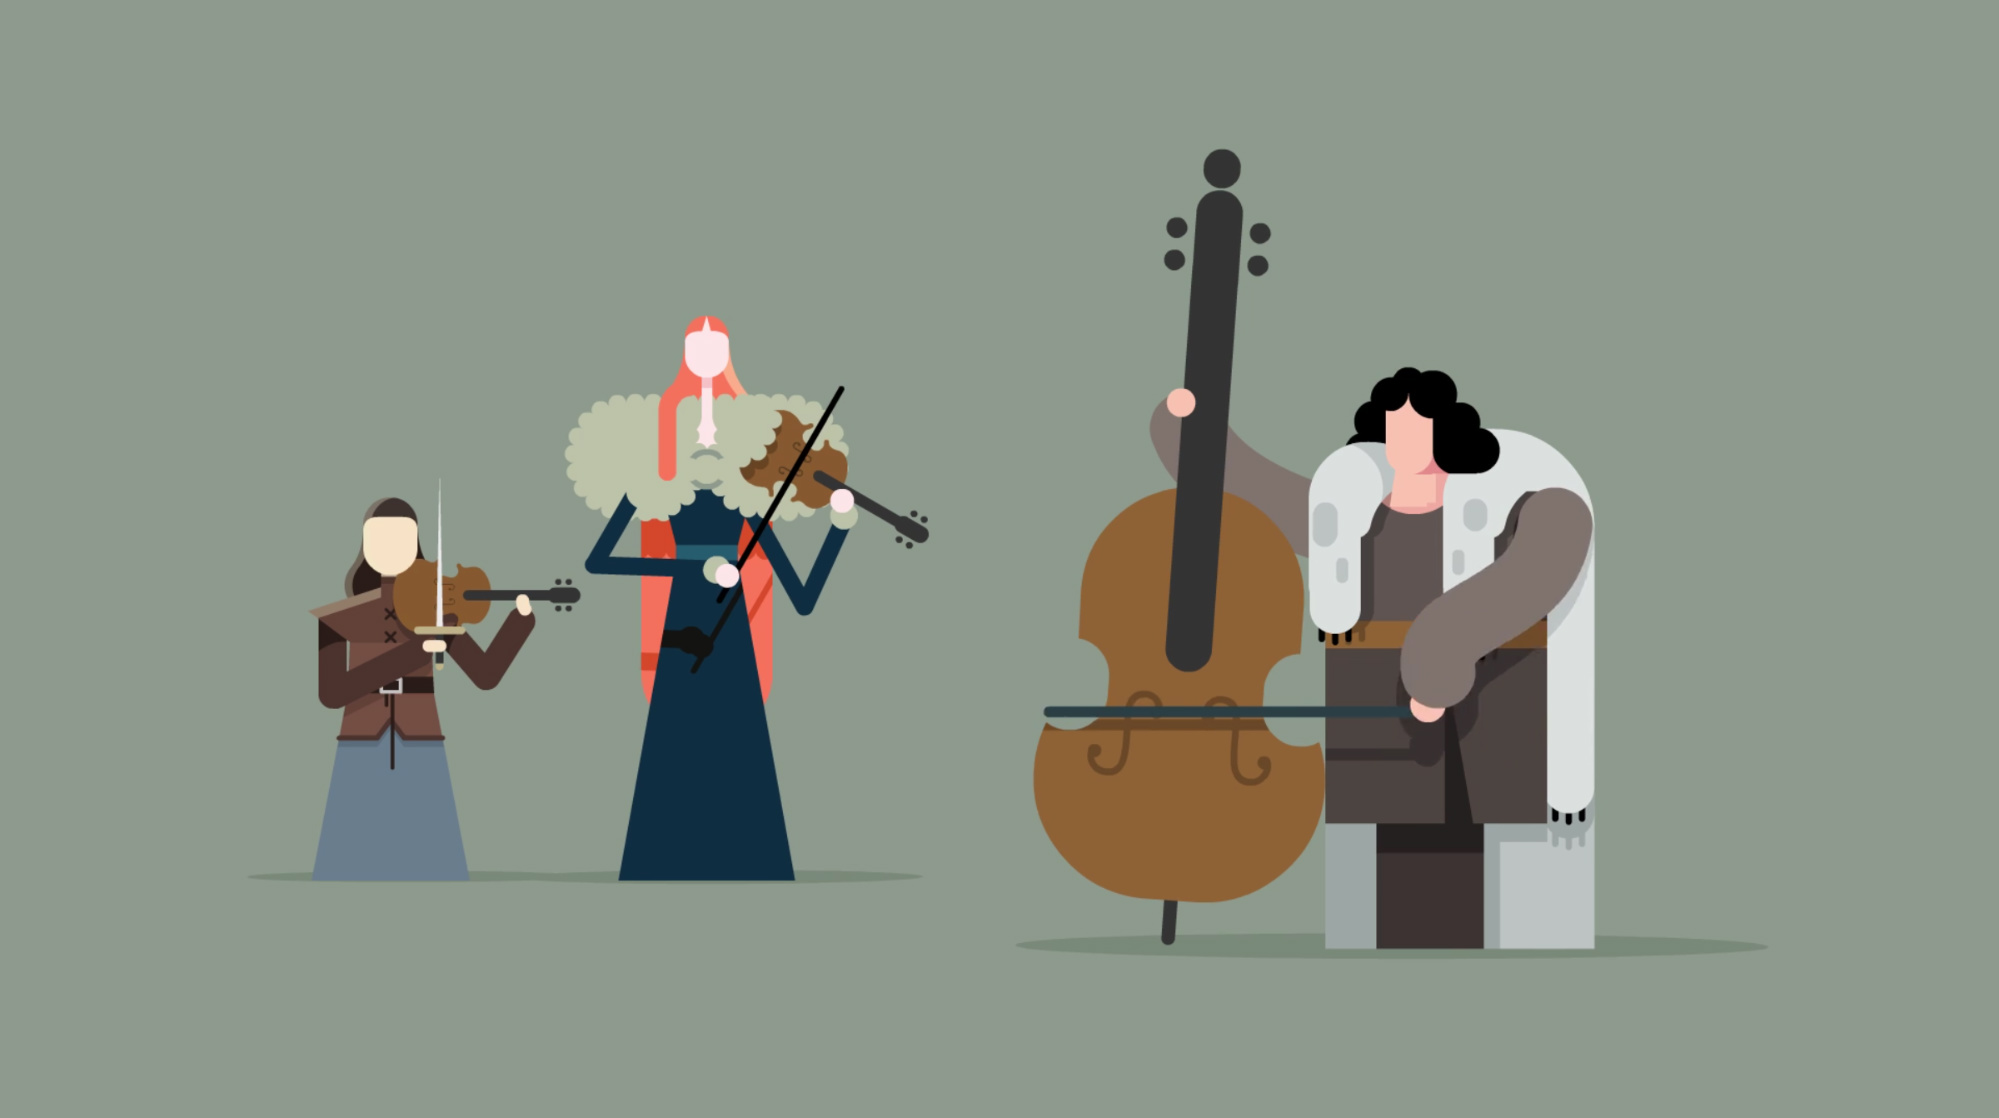 GIFs of Thrones | An Animated Game of Thrones Series by Eran Mendel